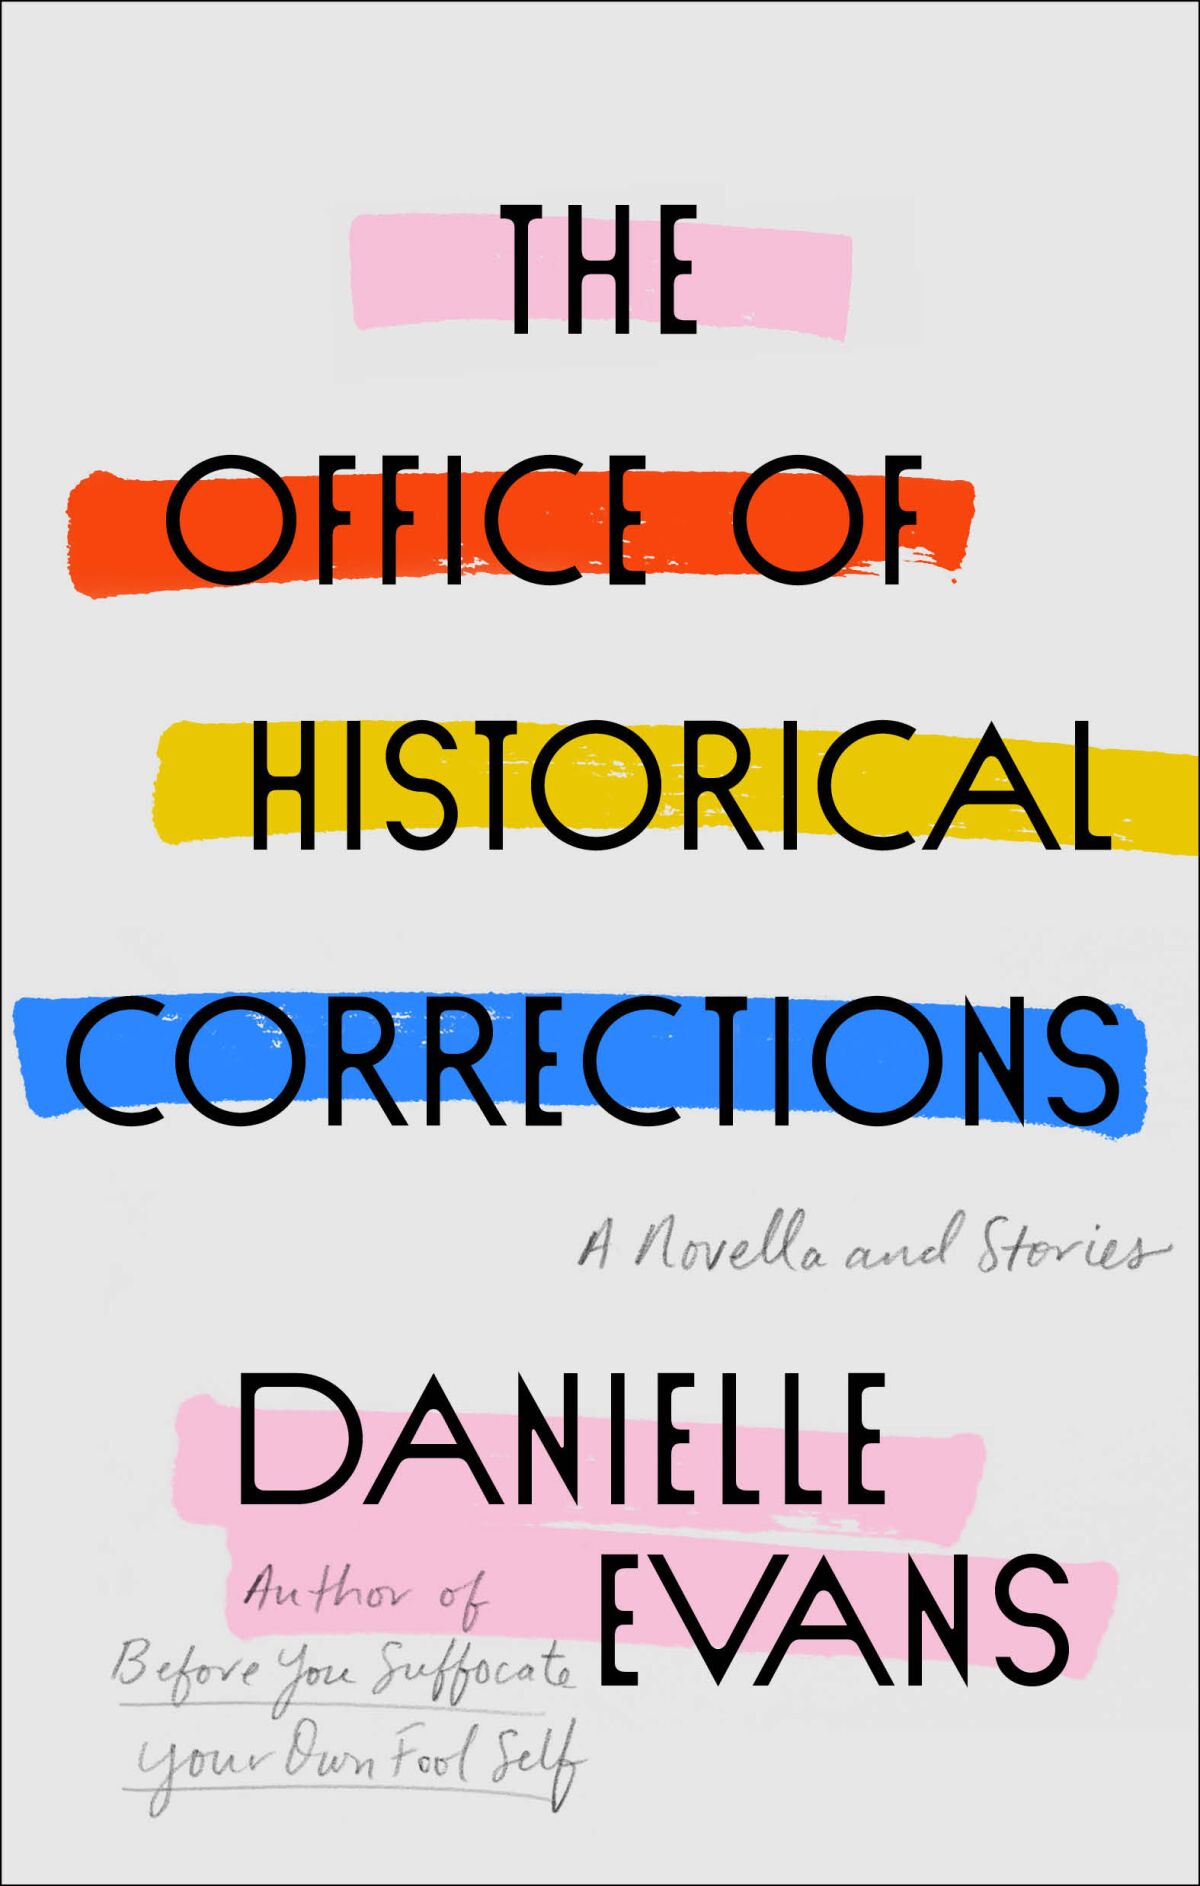 Book jacket for "Office of Historical Corrections" by Danielle Evans.